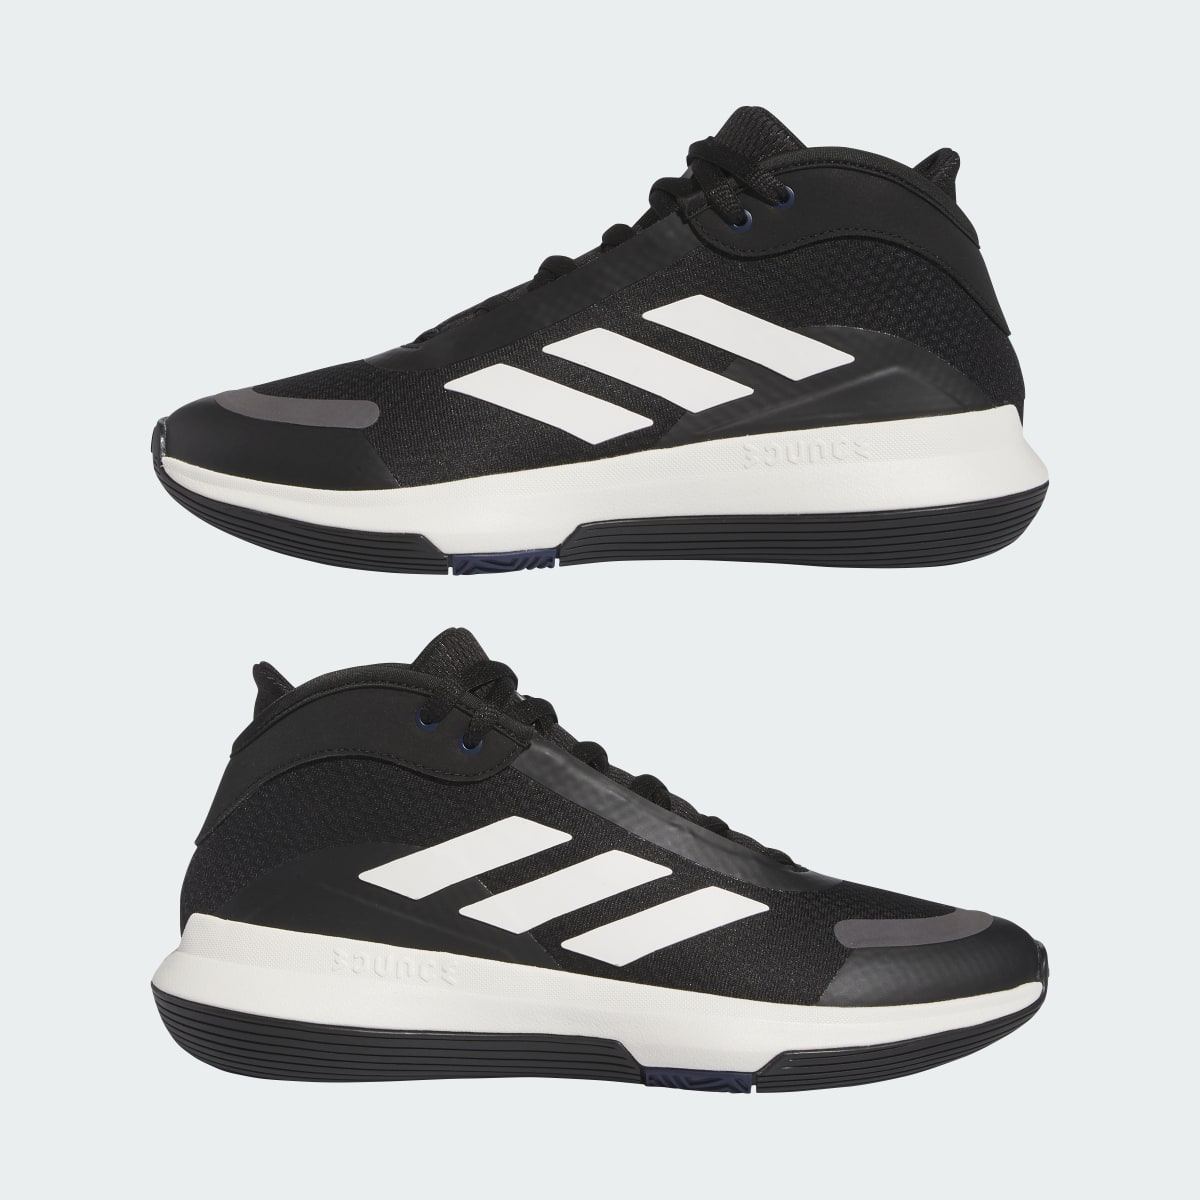 Adidas Bounce Legends Low Basketball Shoes. 11